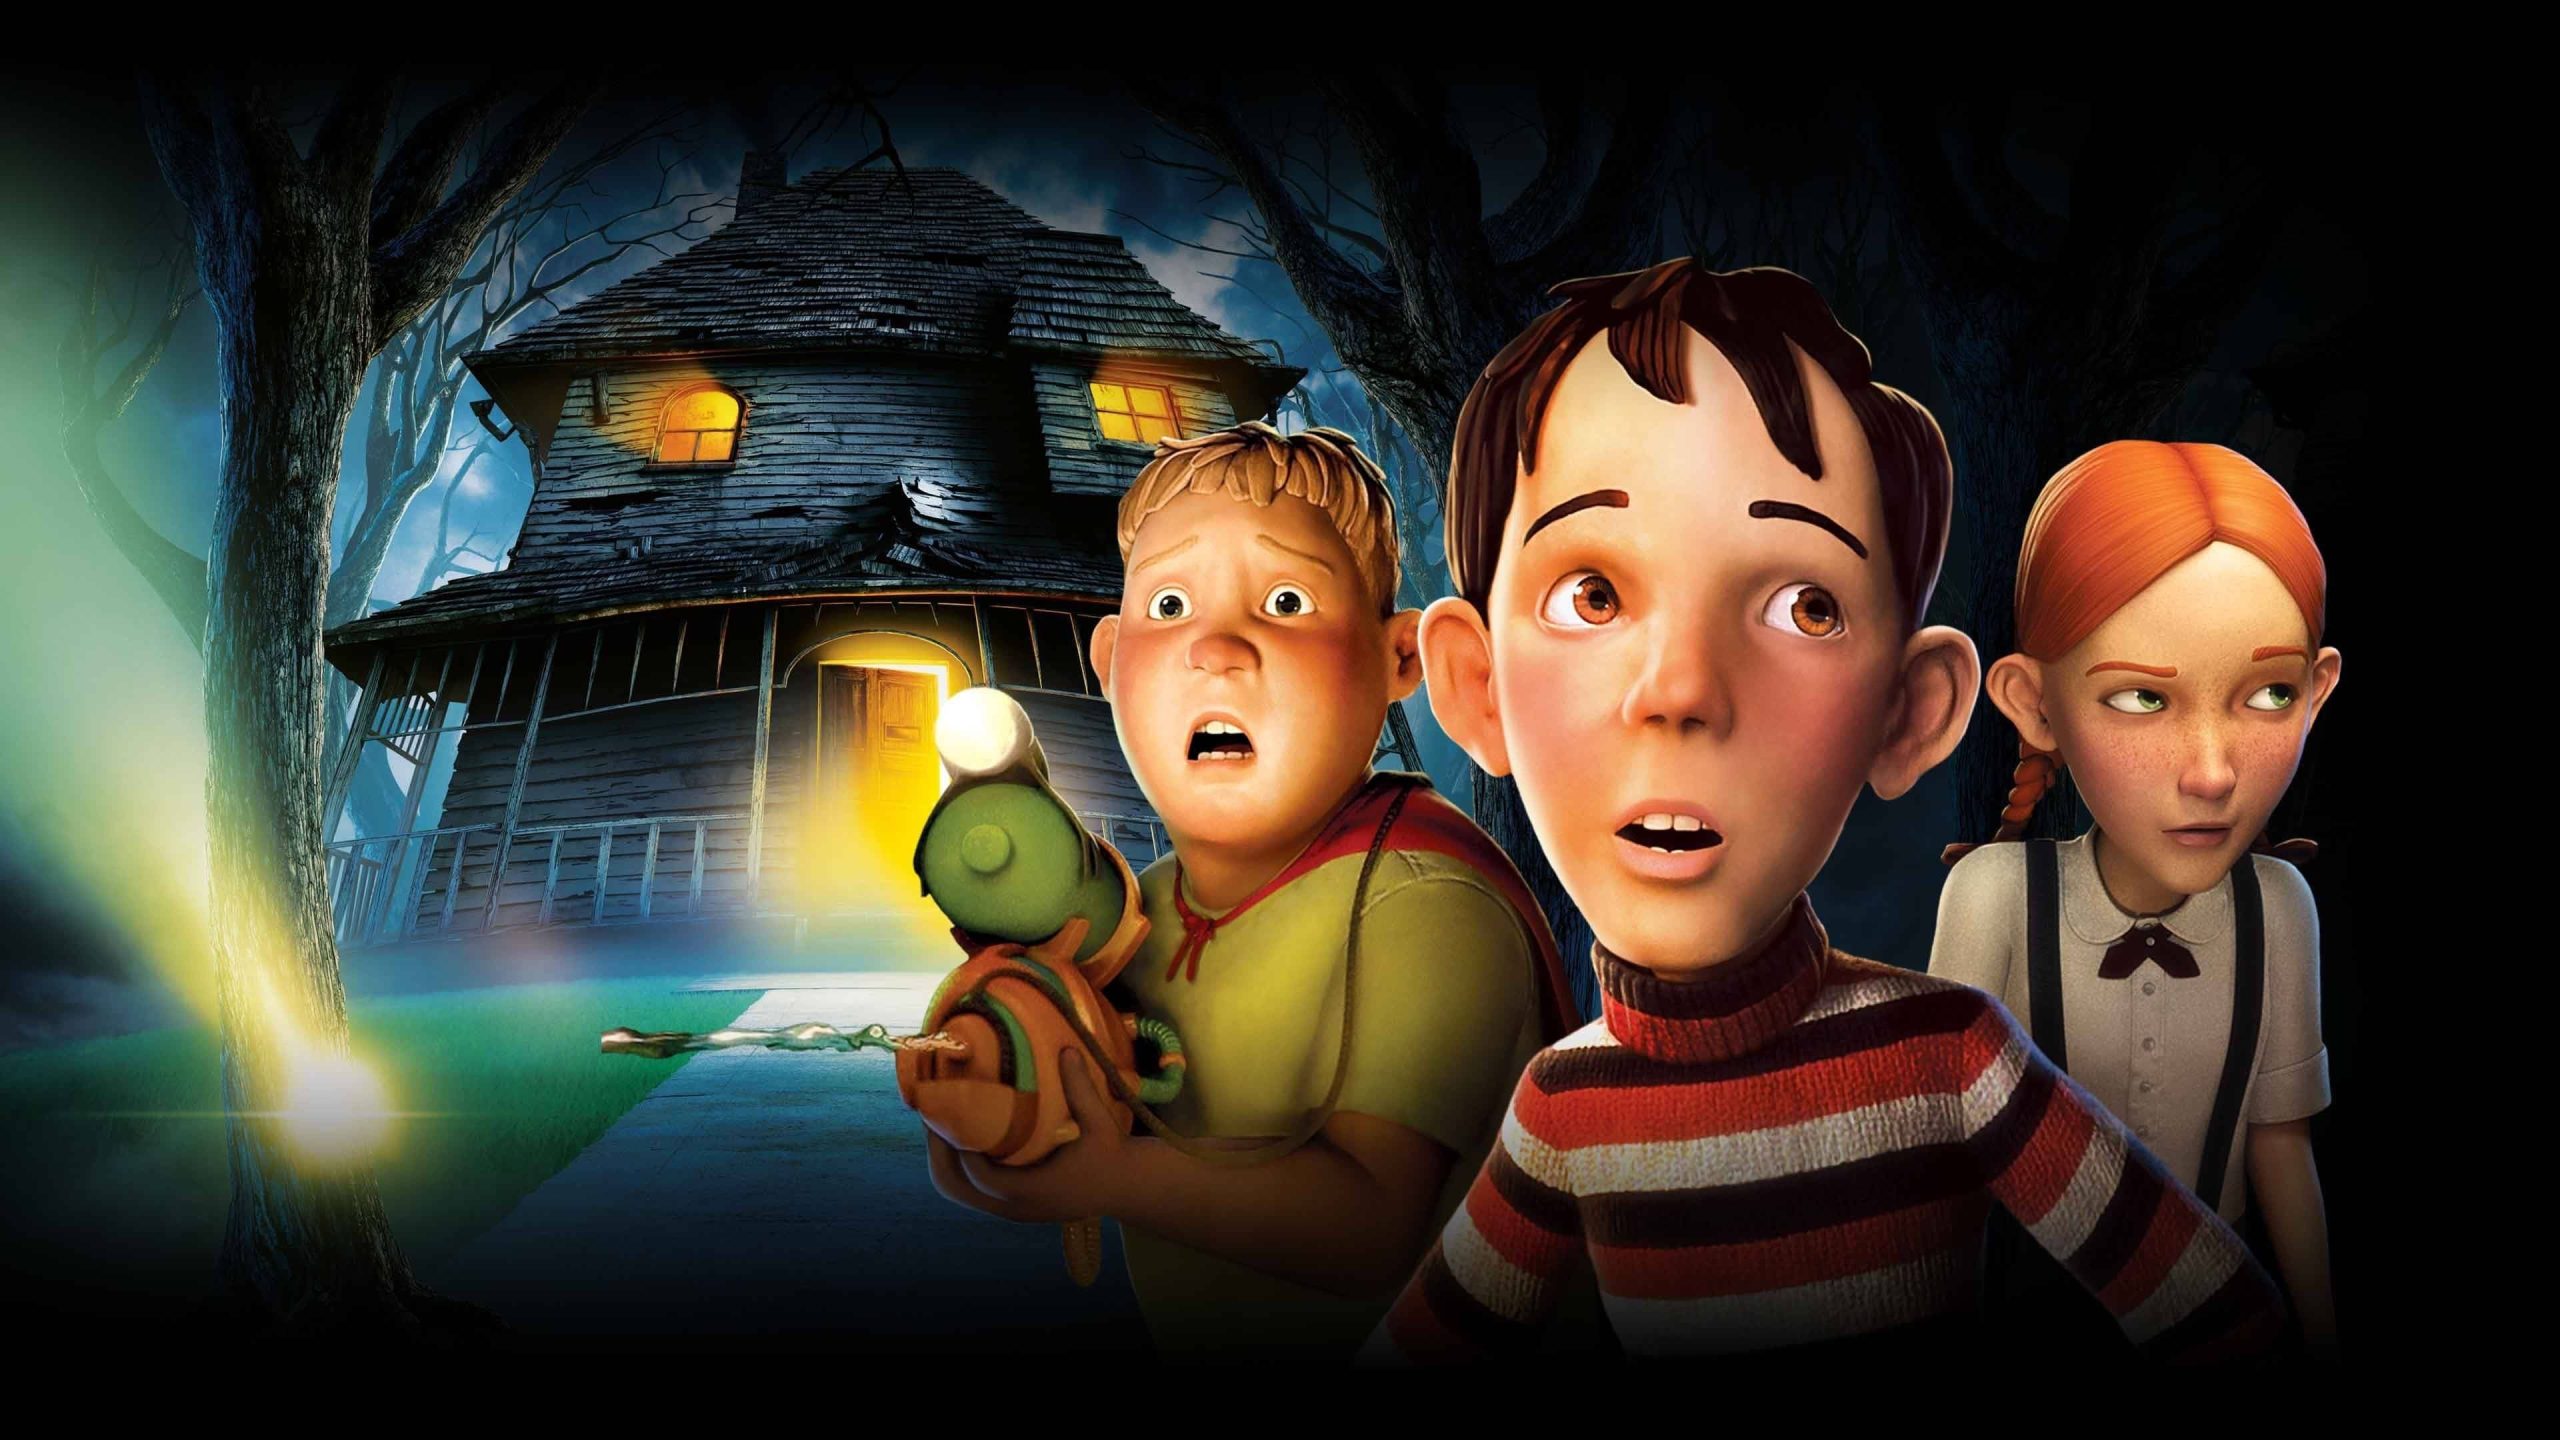 Image from the movie "Monster House"